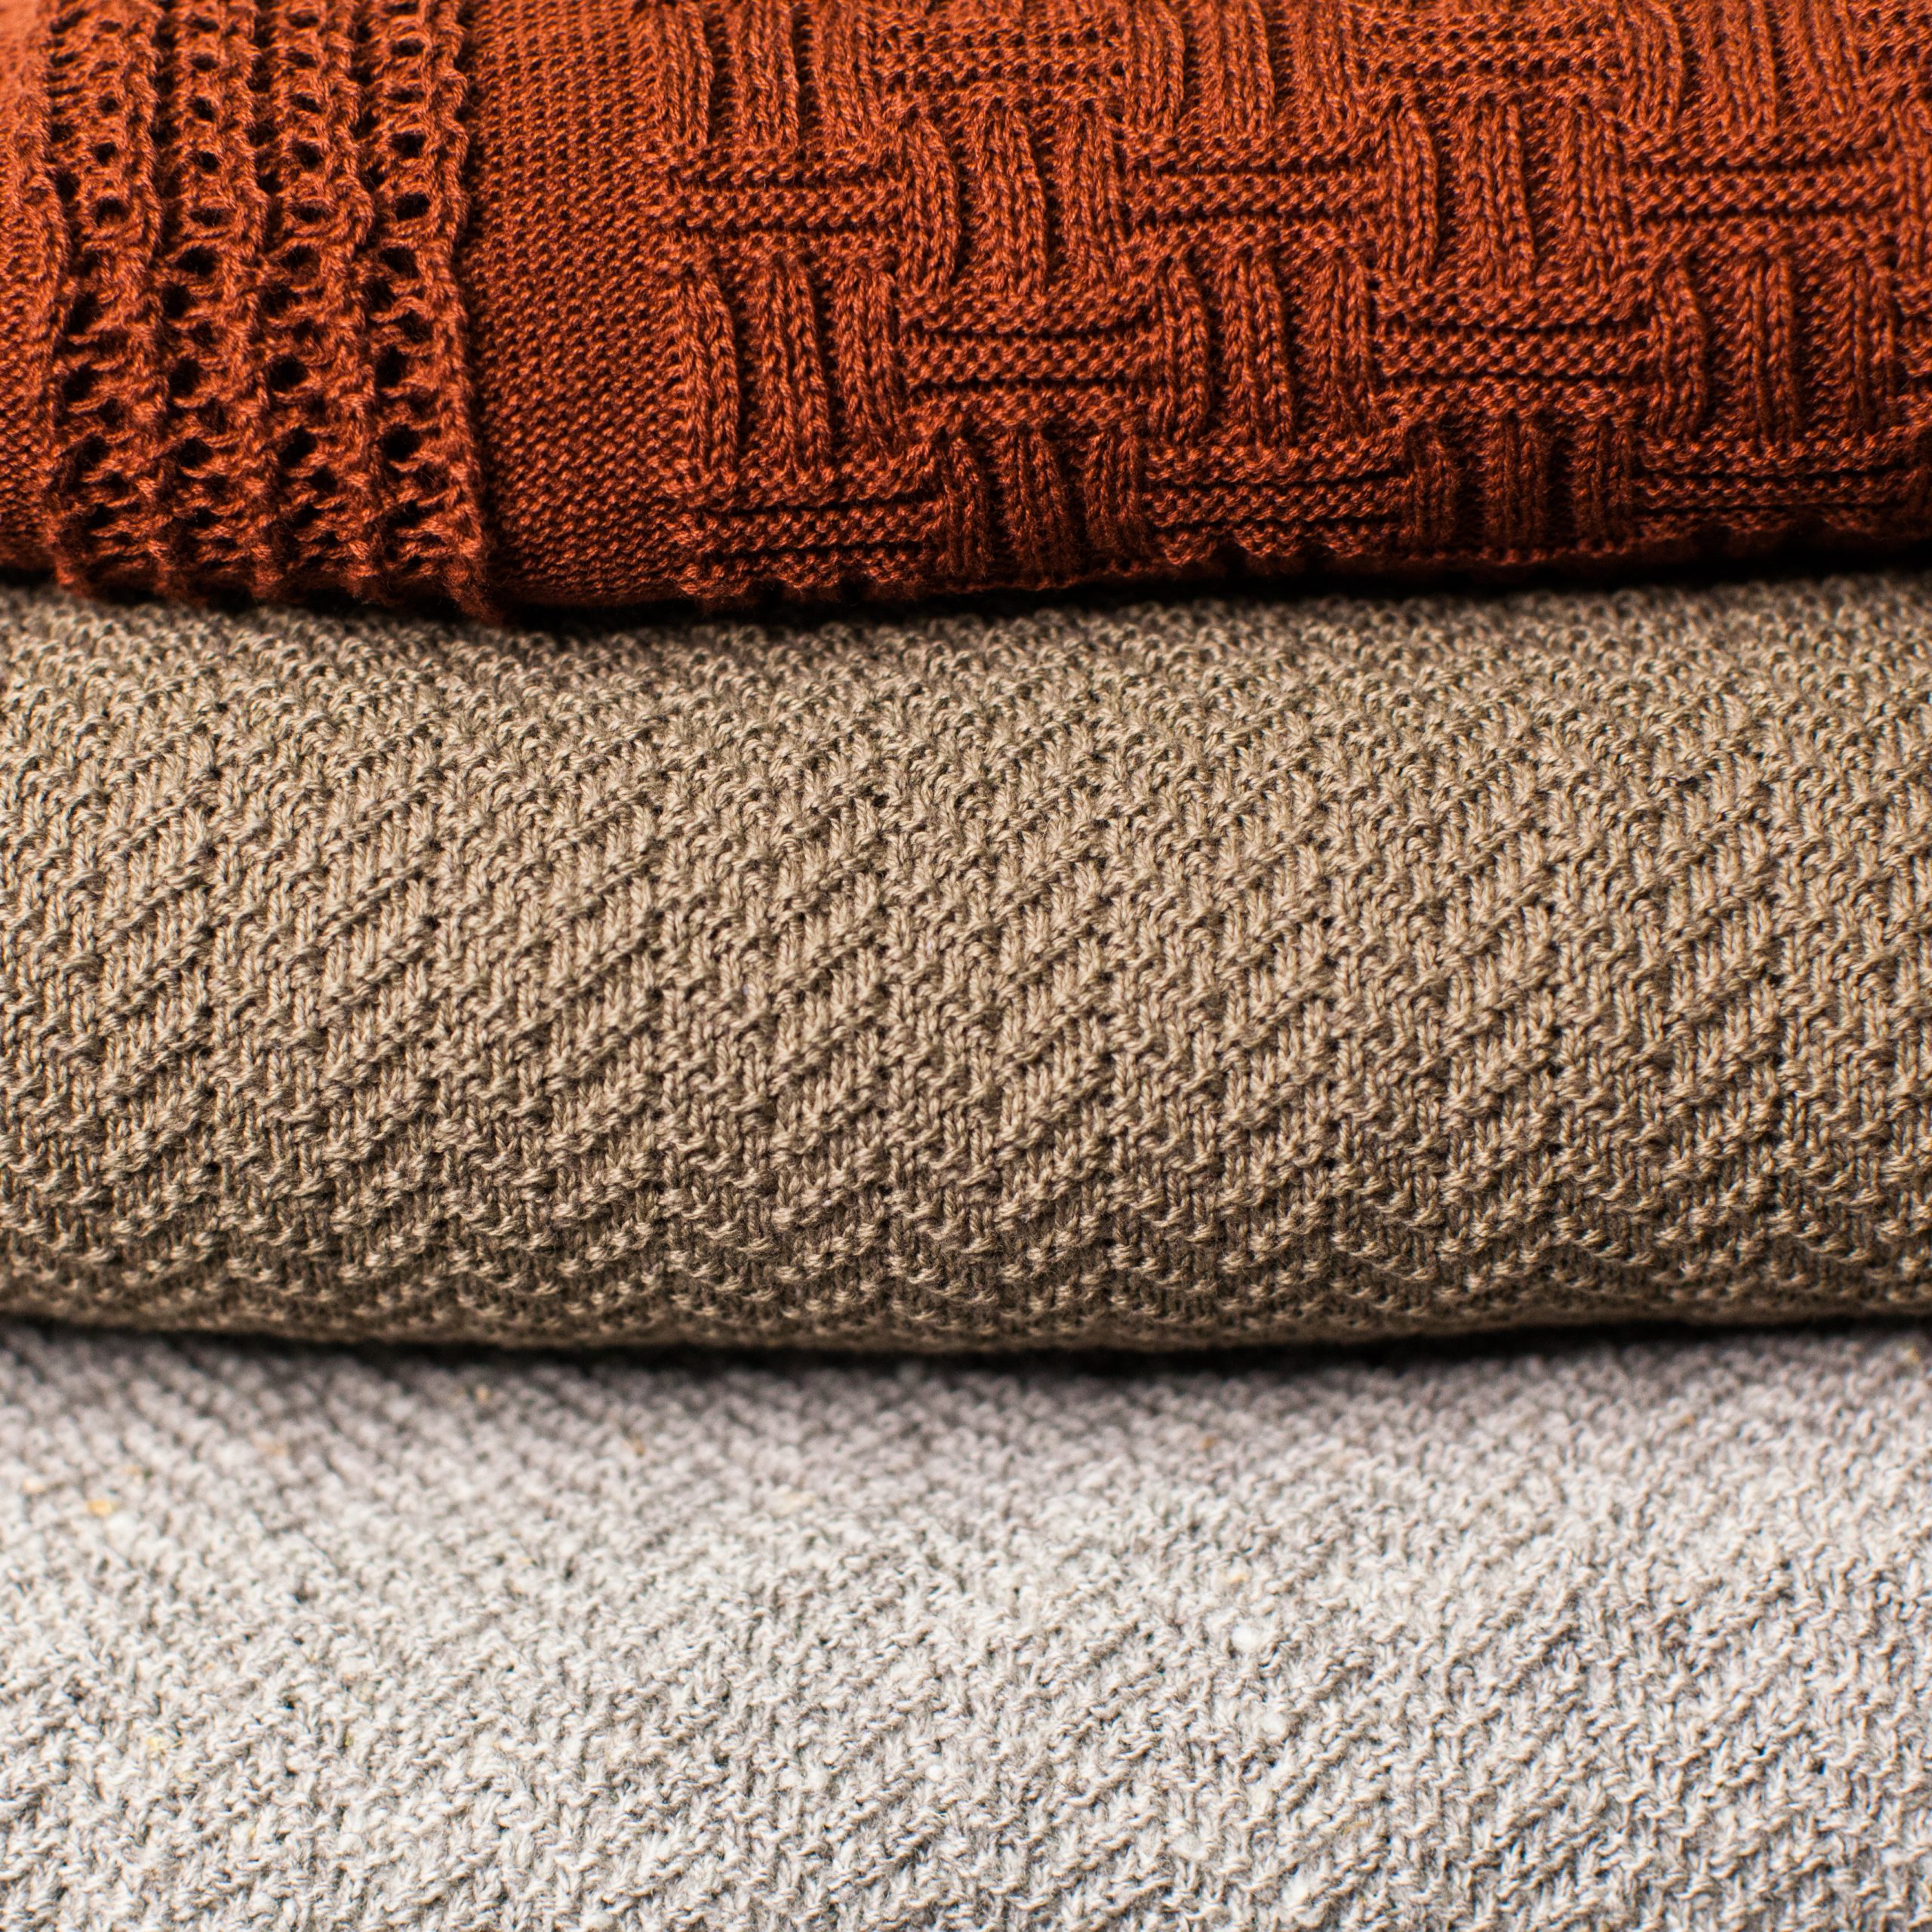 Fine knit cotton blankets stacked with a red complex knit pattern on top of a brown and grey mock herringbone construction